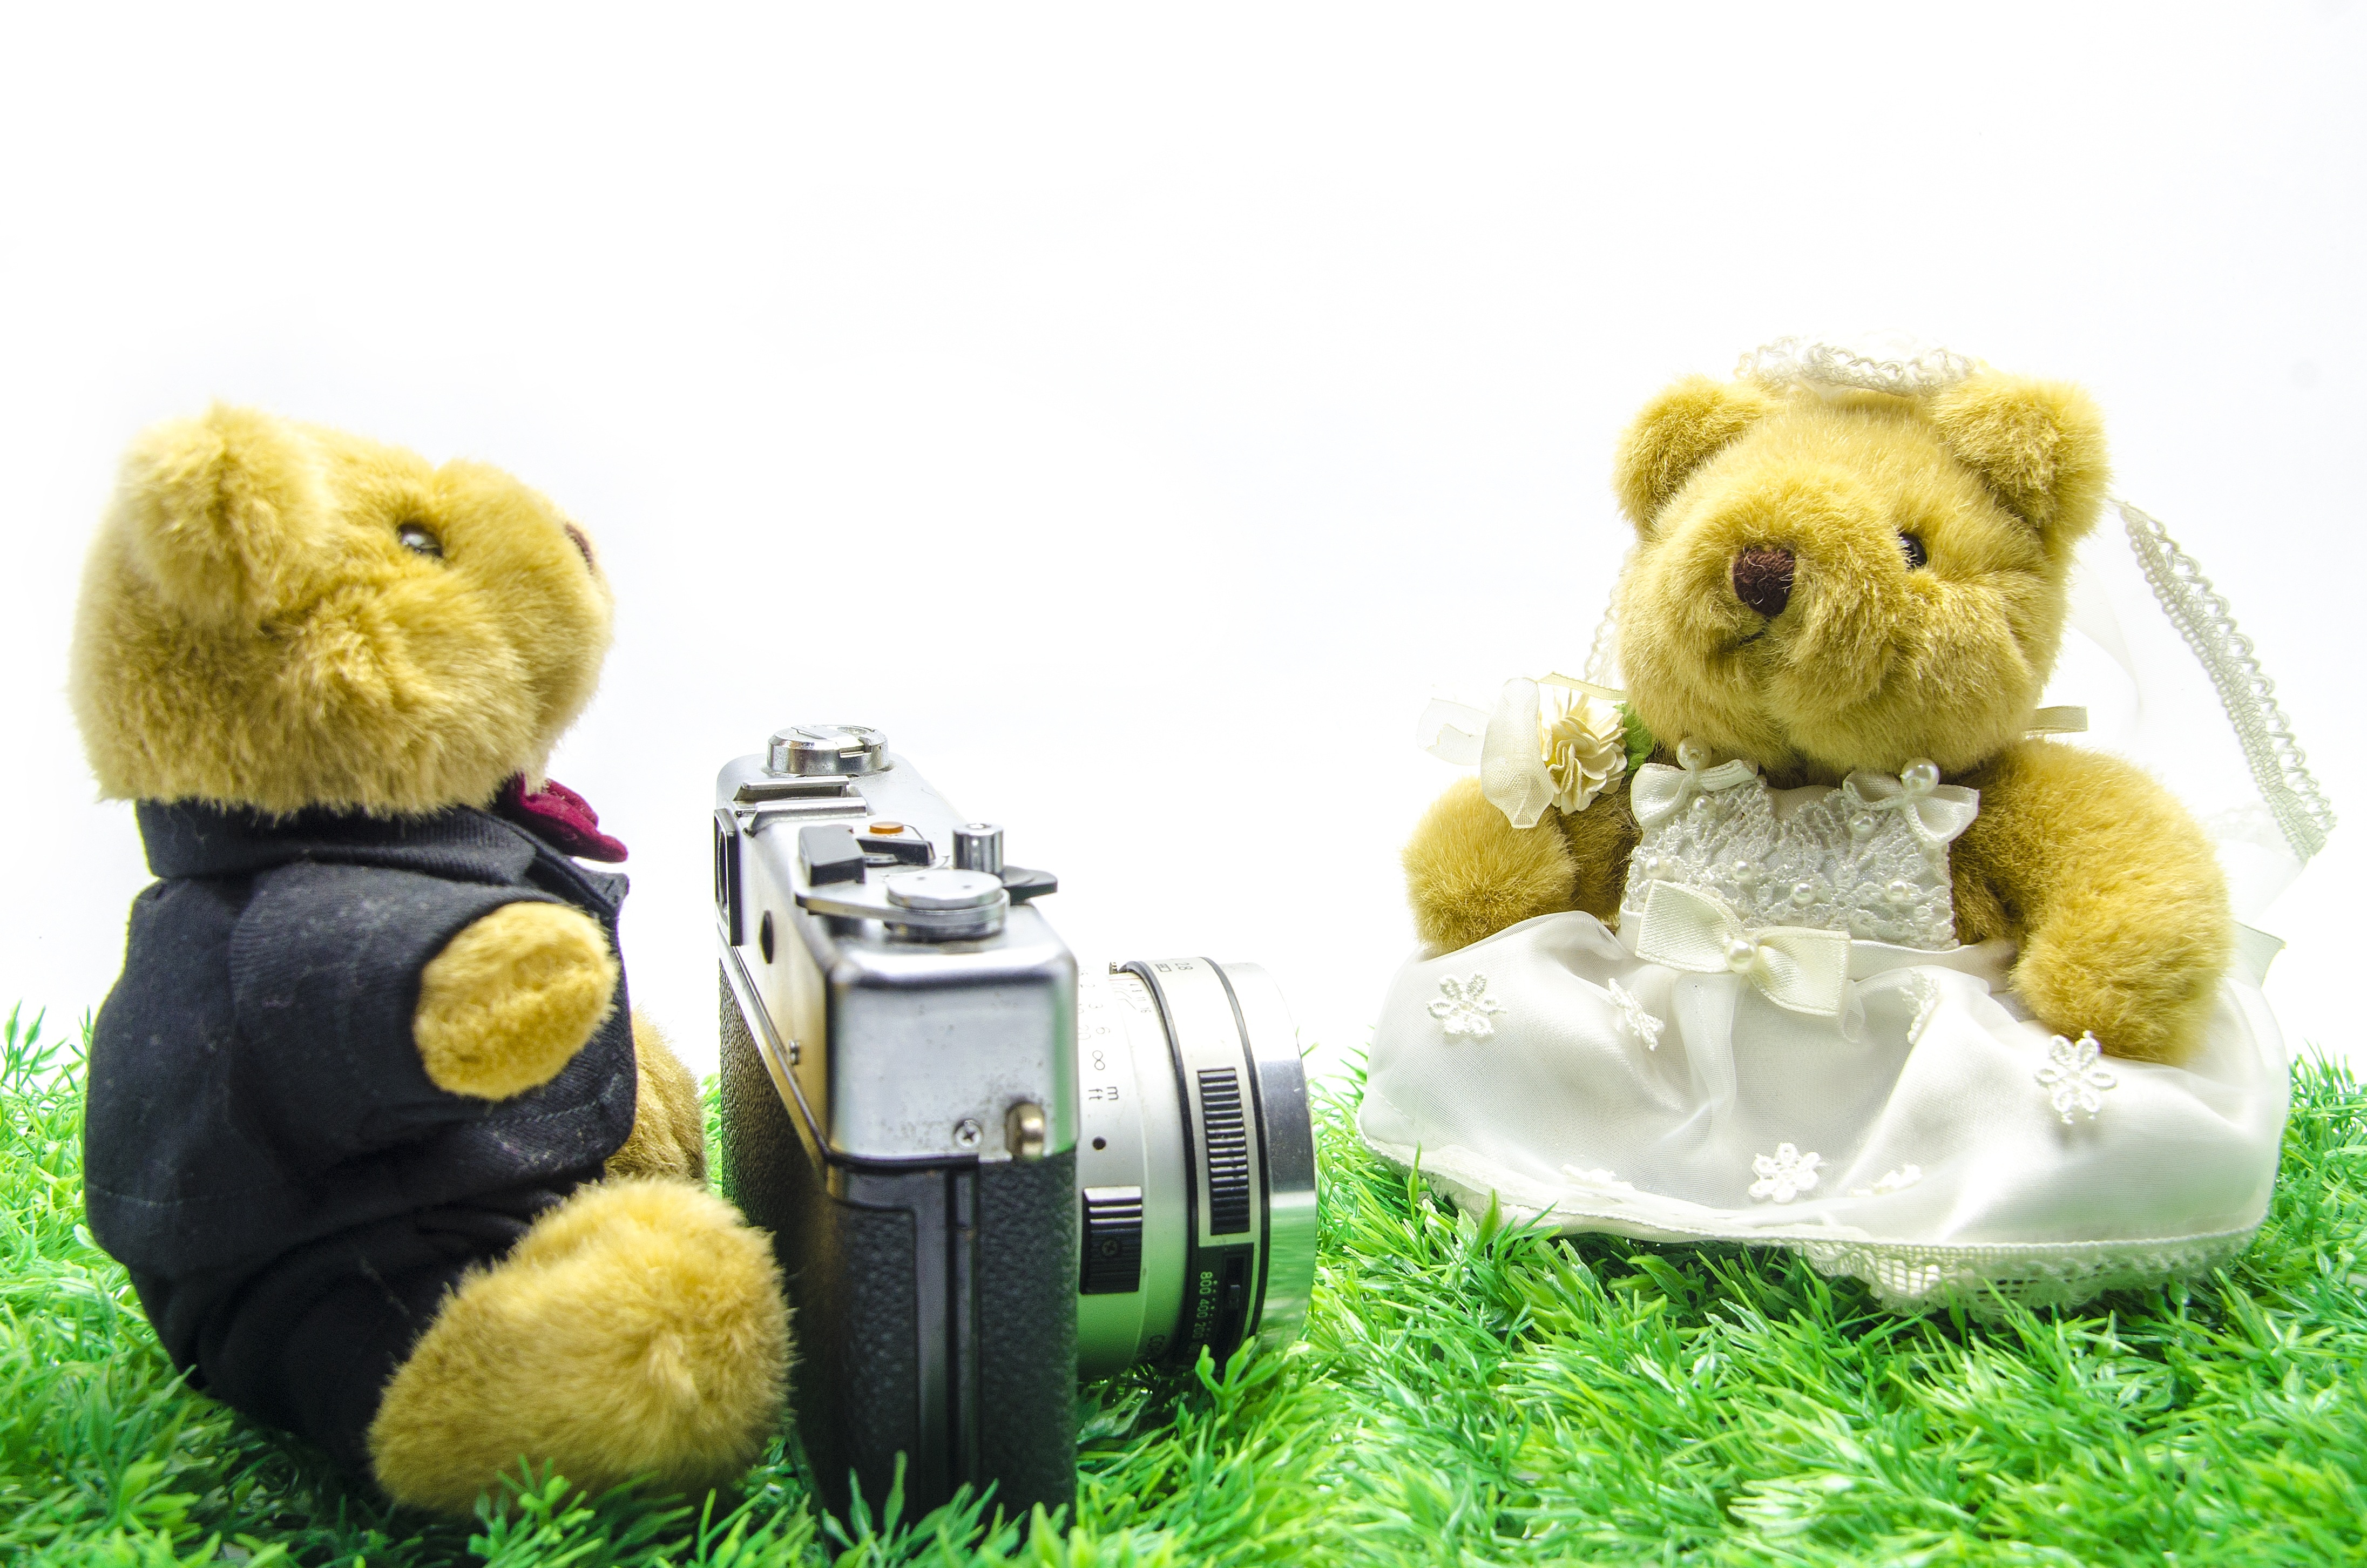 black and grey camera and 2 brown teddy bears